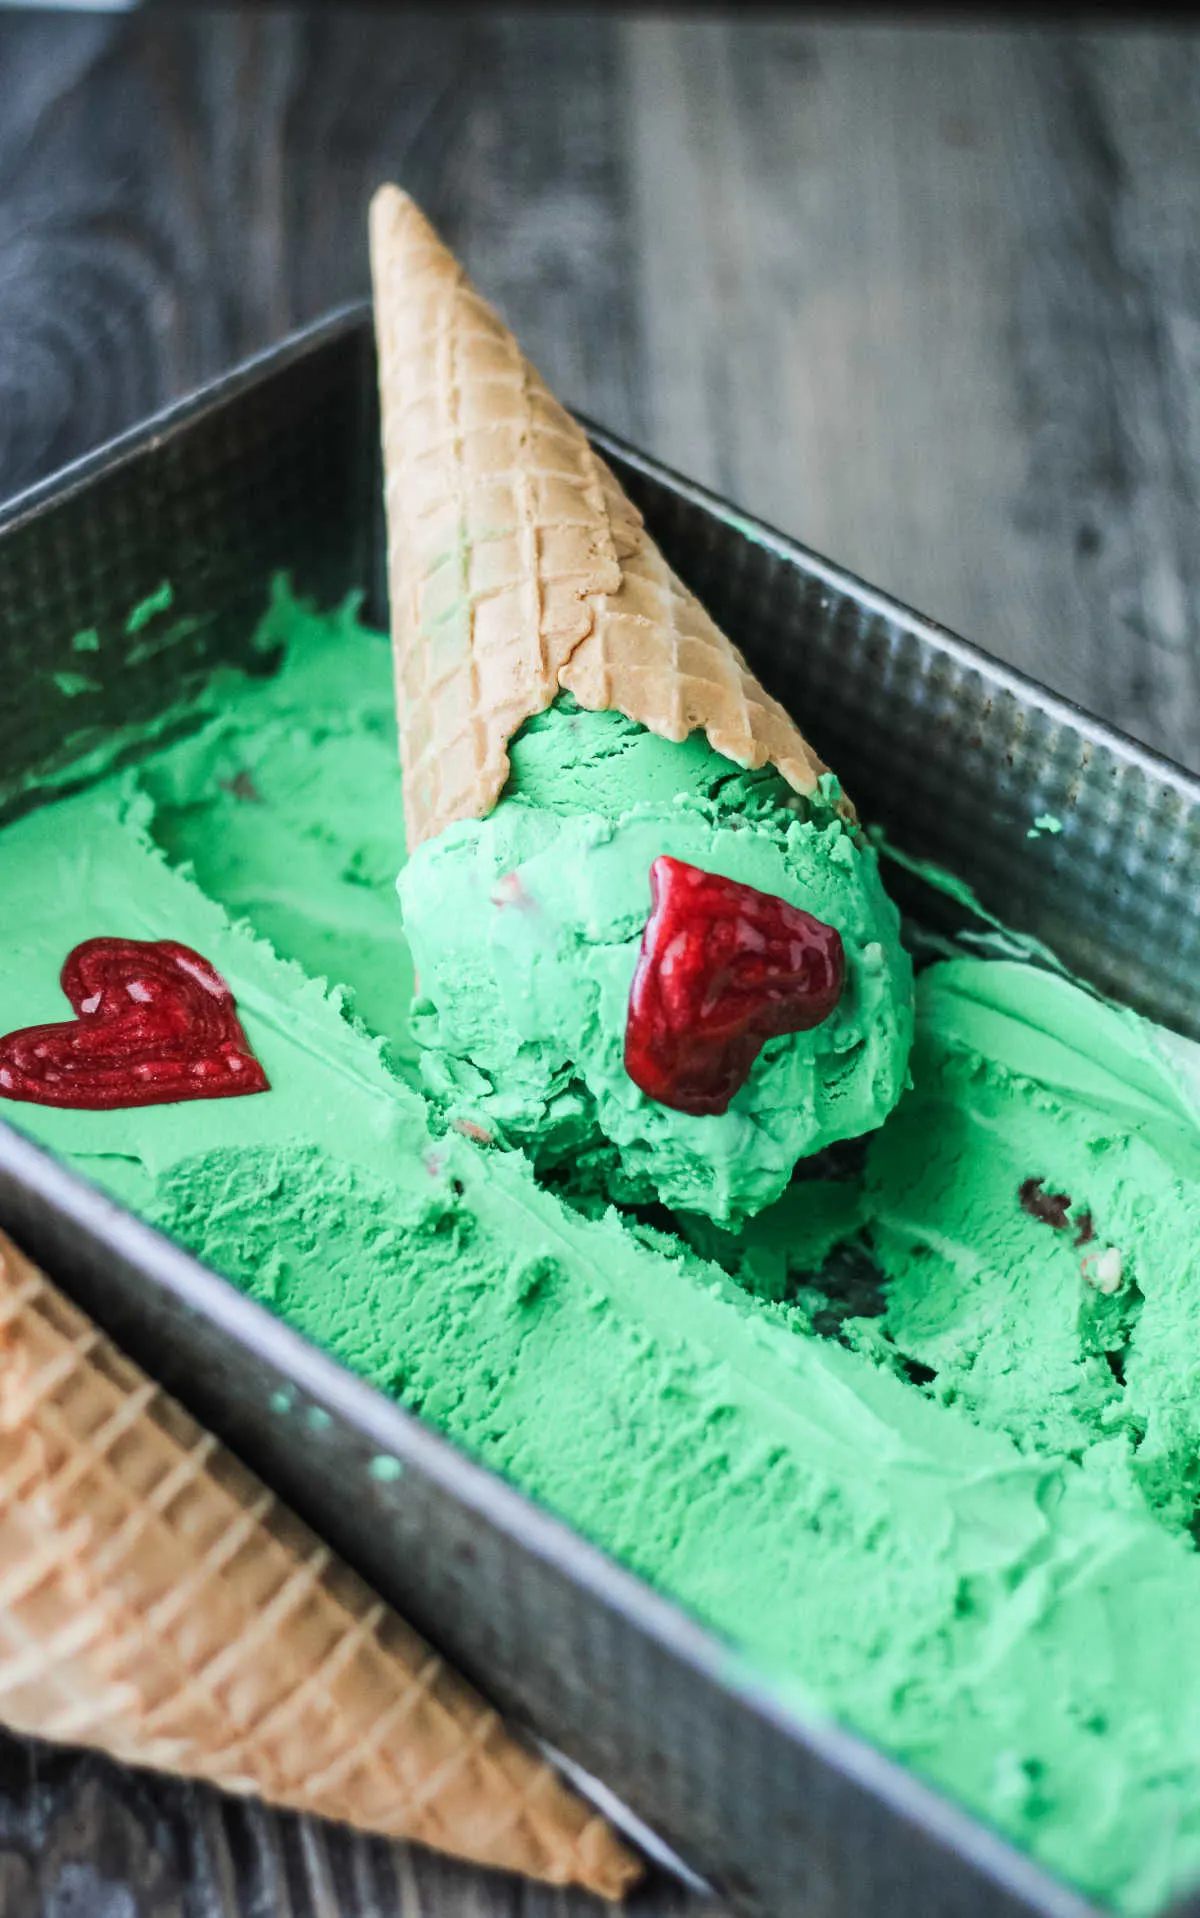 Mint grinch ice cream ready to eat. 